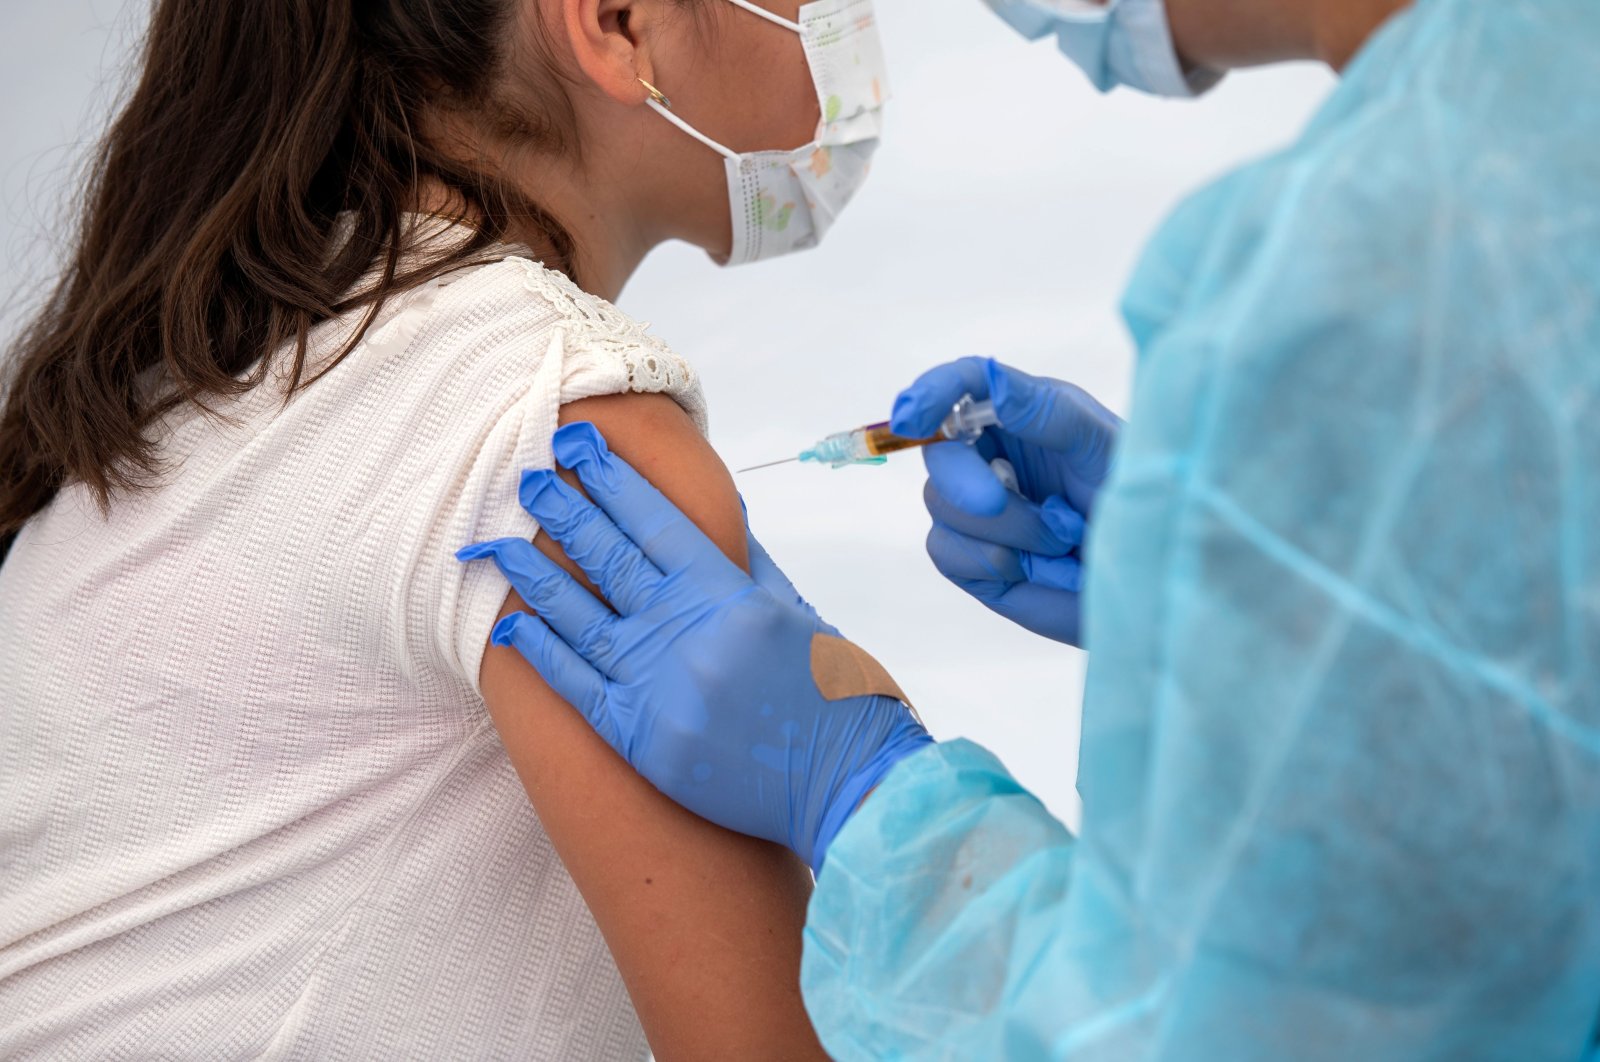 A health worker vaccinates a patient during the Saban Community Clinic Vaccine Drive Up for LA Children on August 12, 2020, in Los Angeles, California. (AFP Photo)